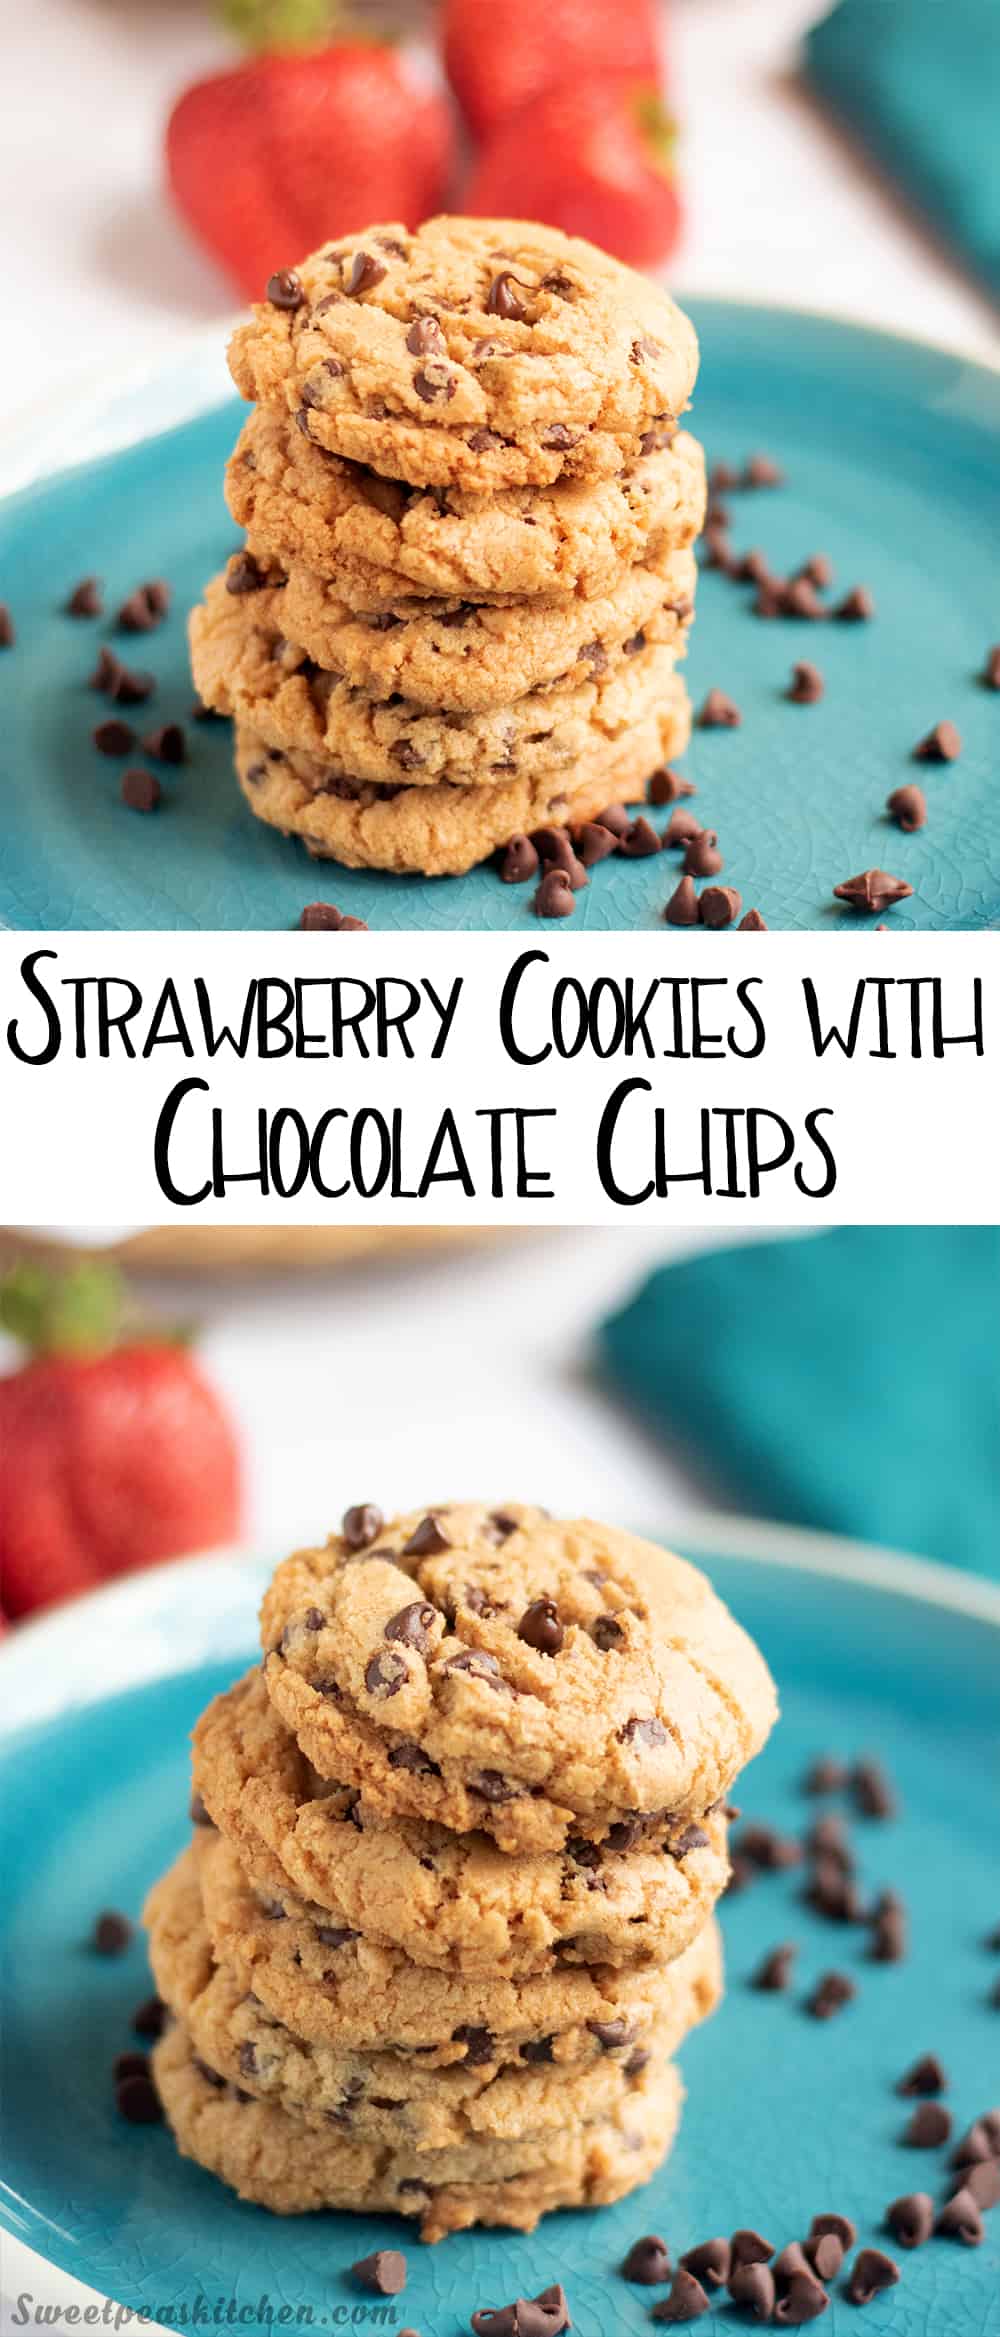 Strawberry Cookies with Chocolate Chips